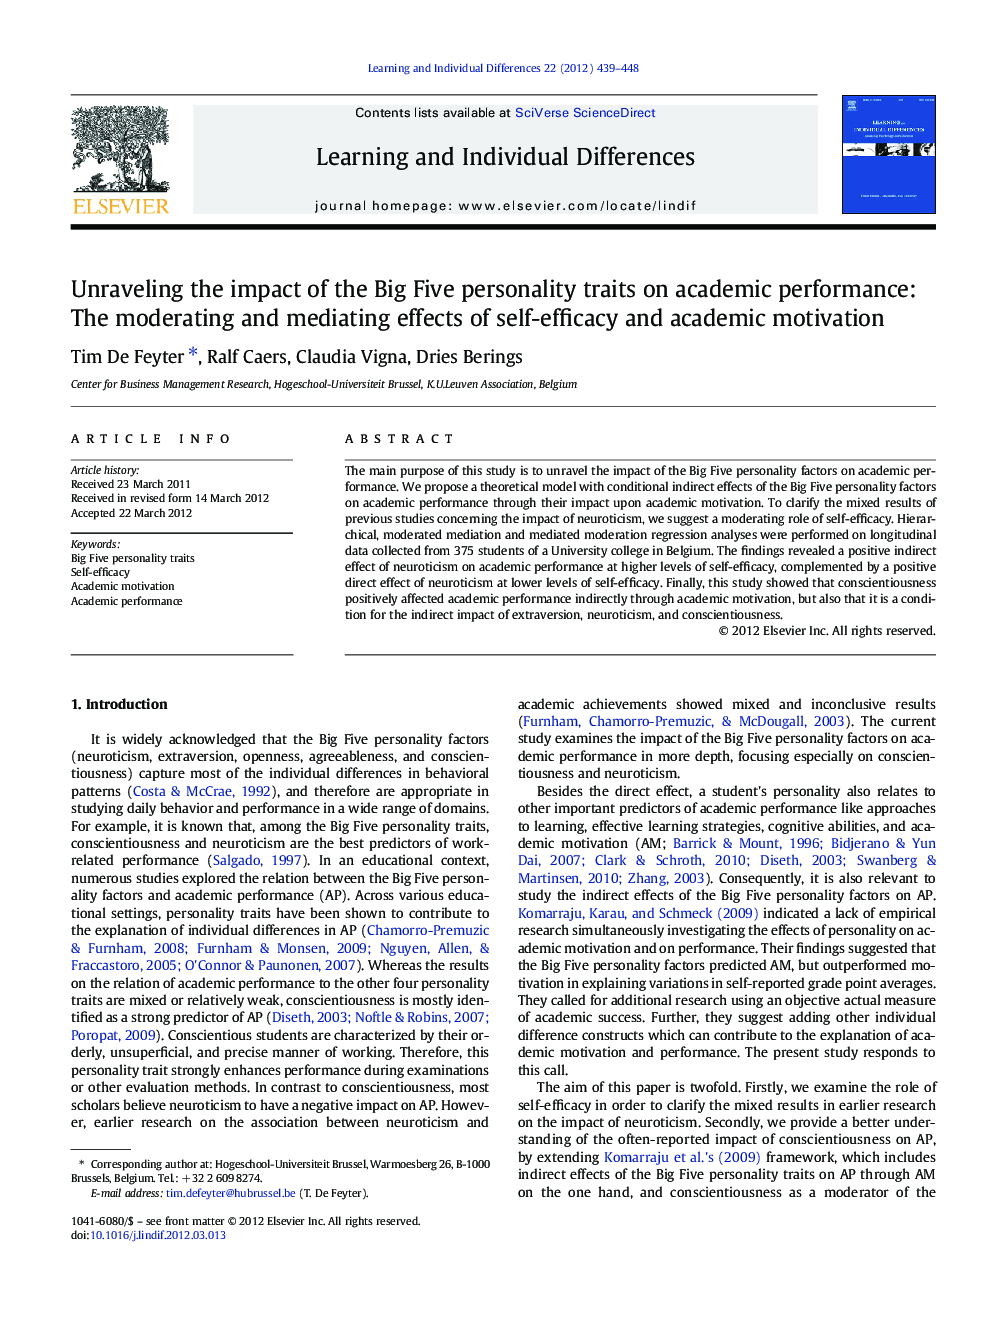 Unraveling the impact of the Big Five personality traits on academic performance: The moderating and mediating effects of self-efficacy and academic motivation